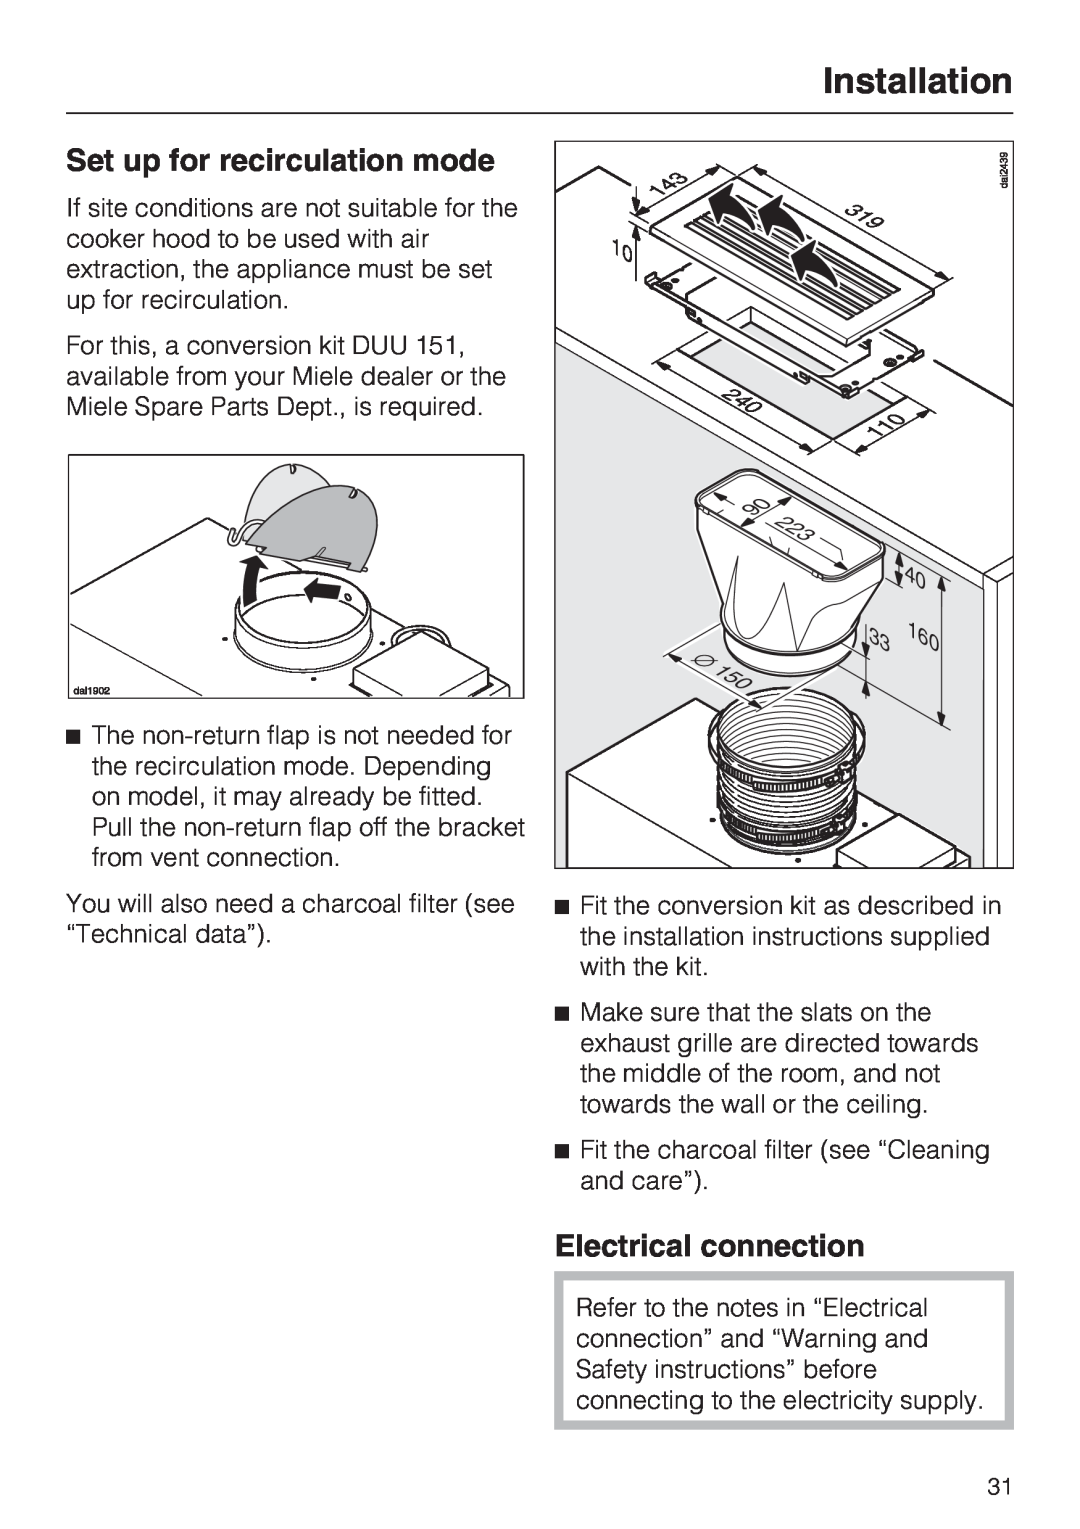 Miele DA 3160, DA 3190 installation instructions Set up for recirculation mode, Electrical connection, Installation 